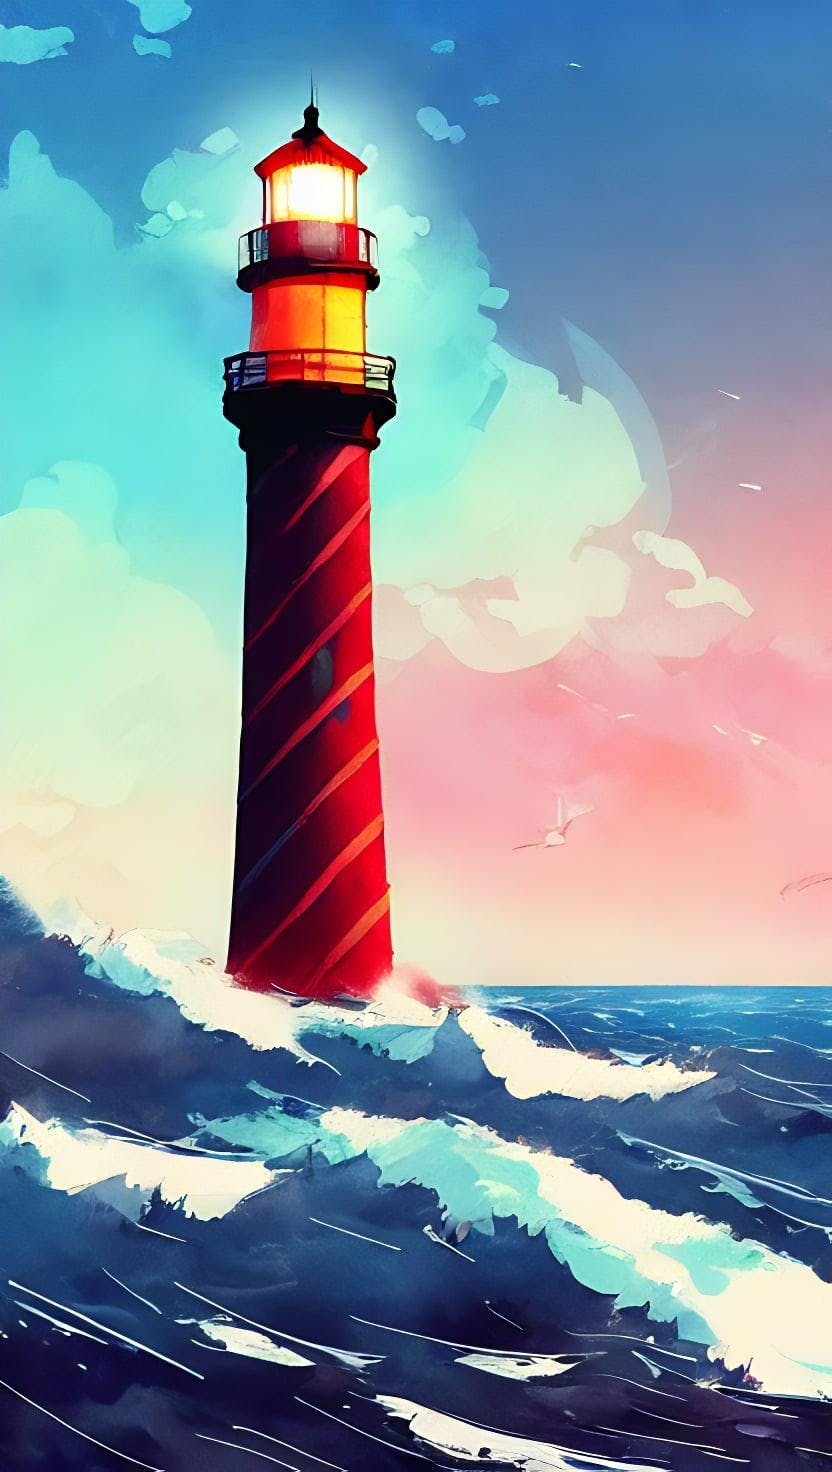 Digital Painting Of Majestic Waves Crashing Against A Tall Lit Lighthouse In The Distance At Dawn